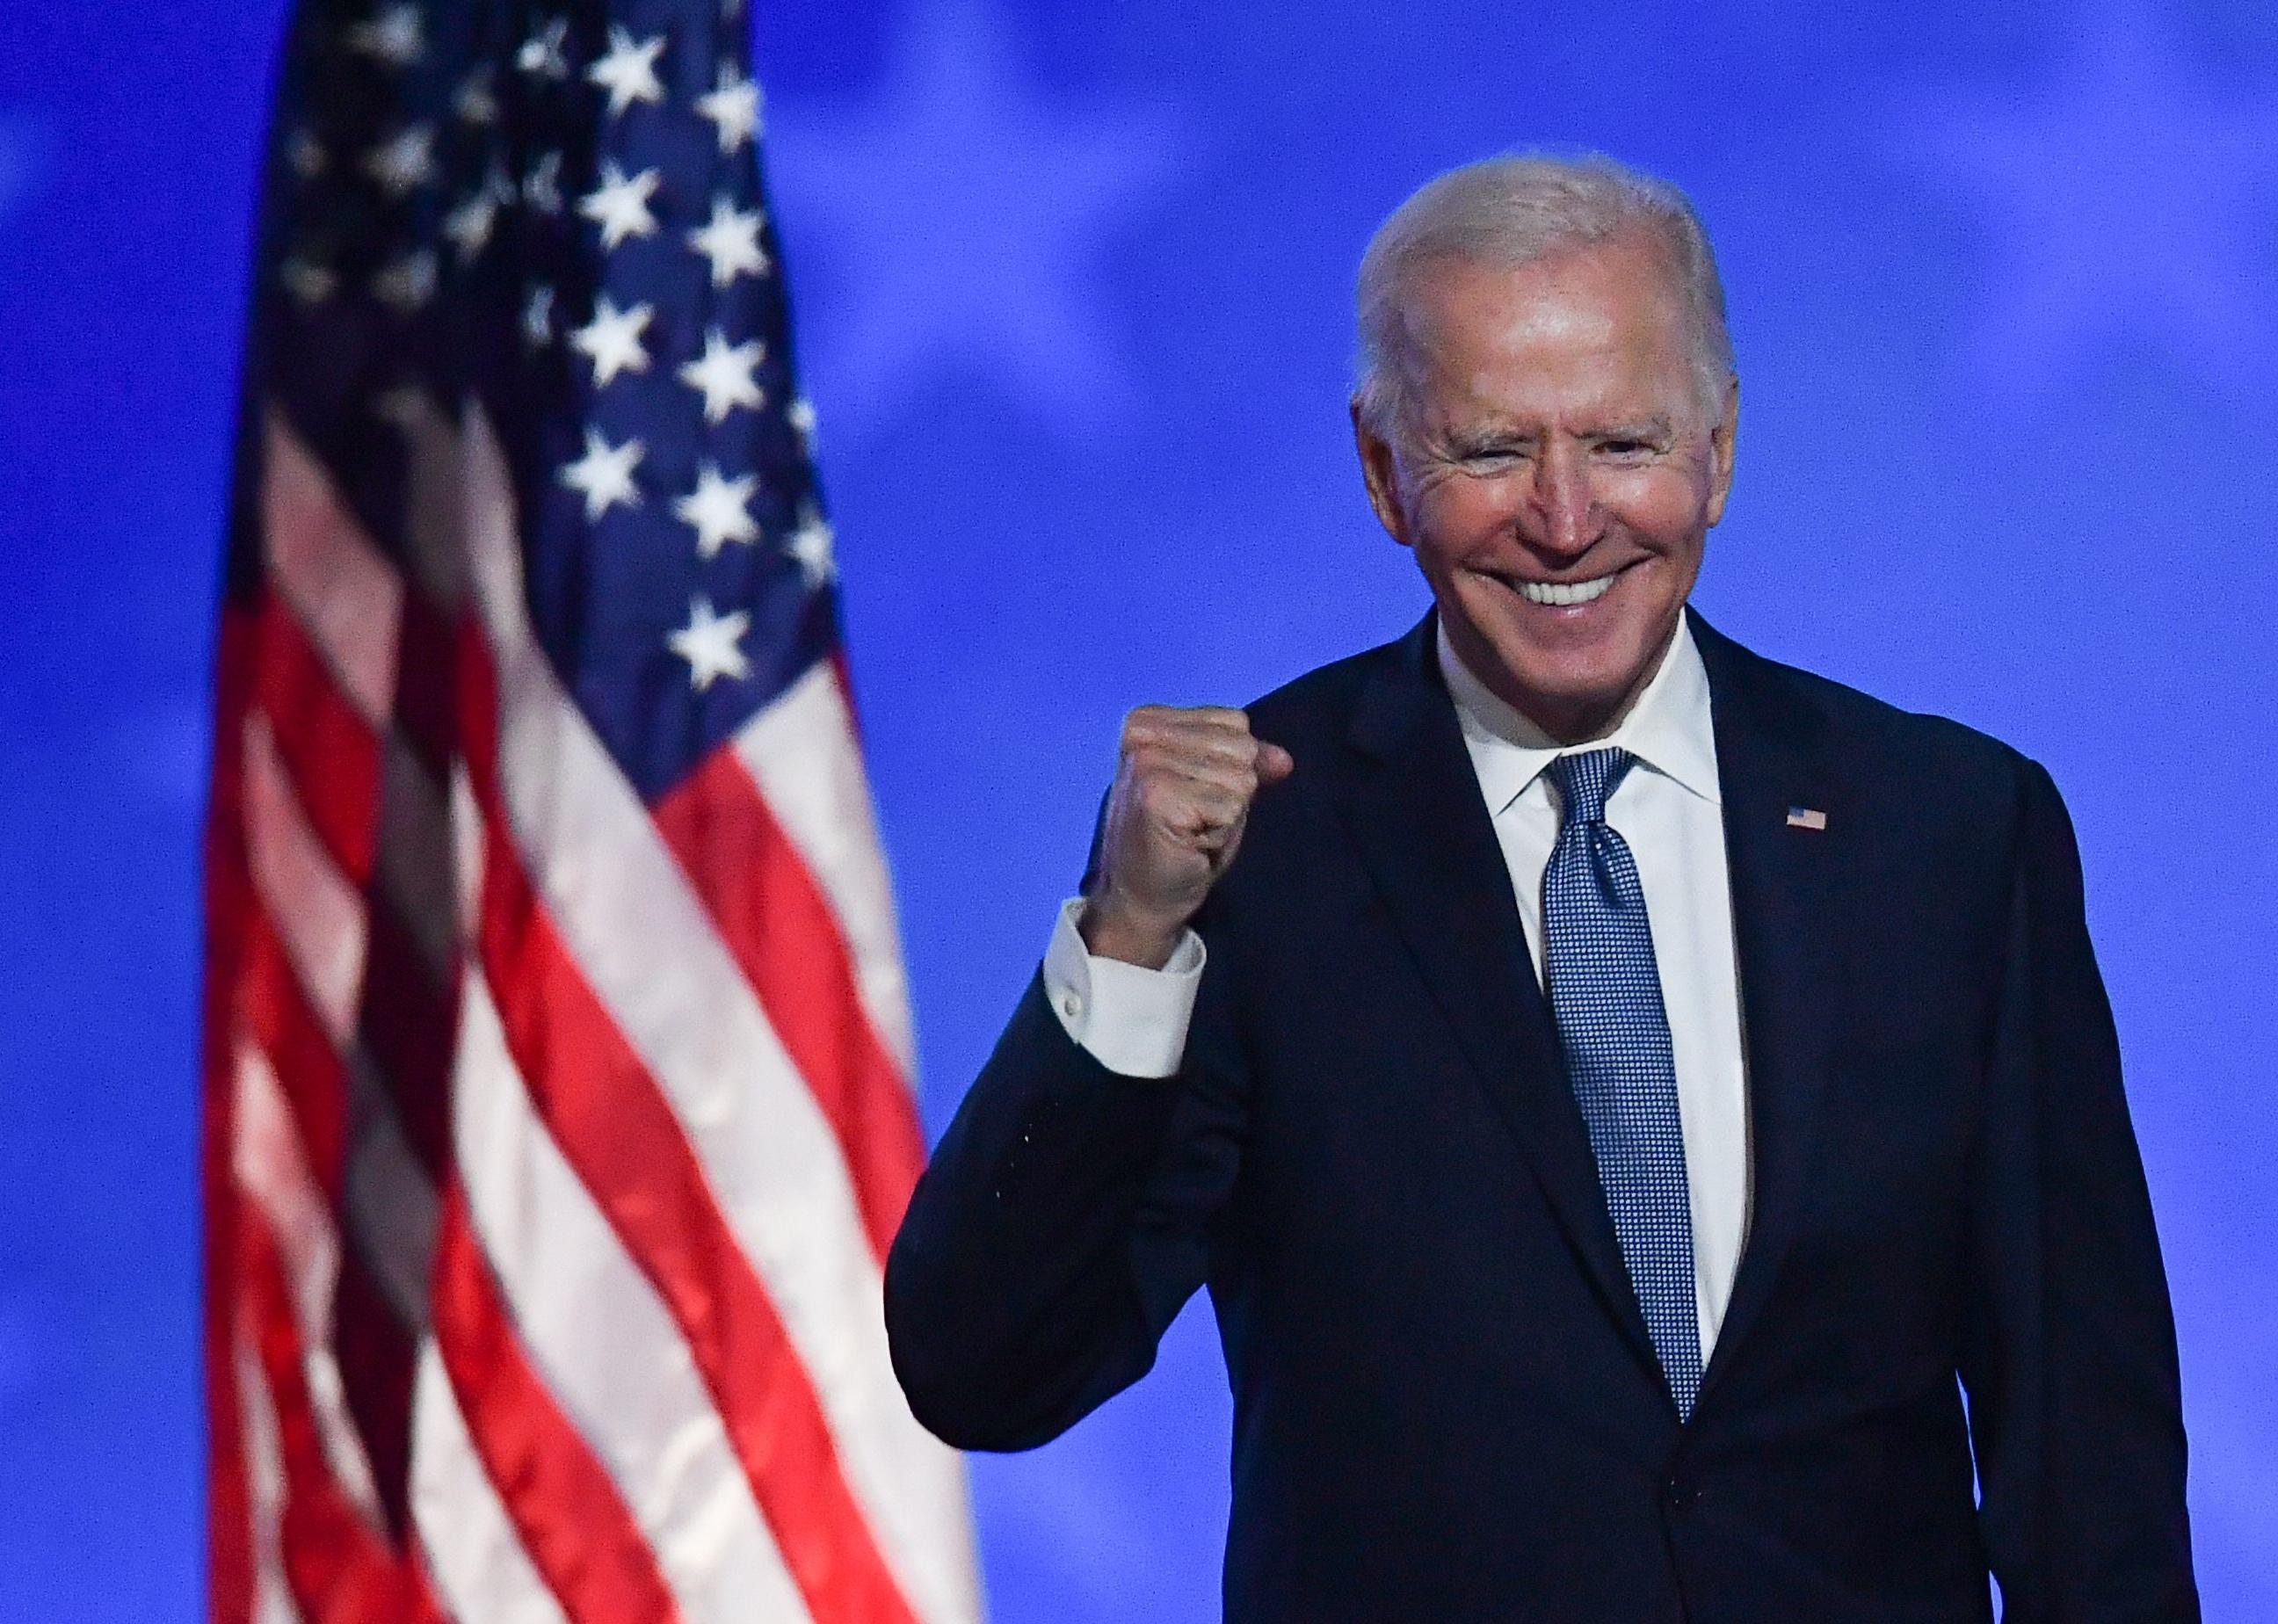 Biden standing next to an American flag smiling and cheering against a blue background.